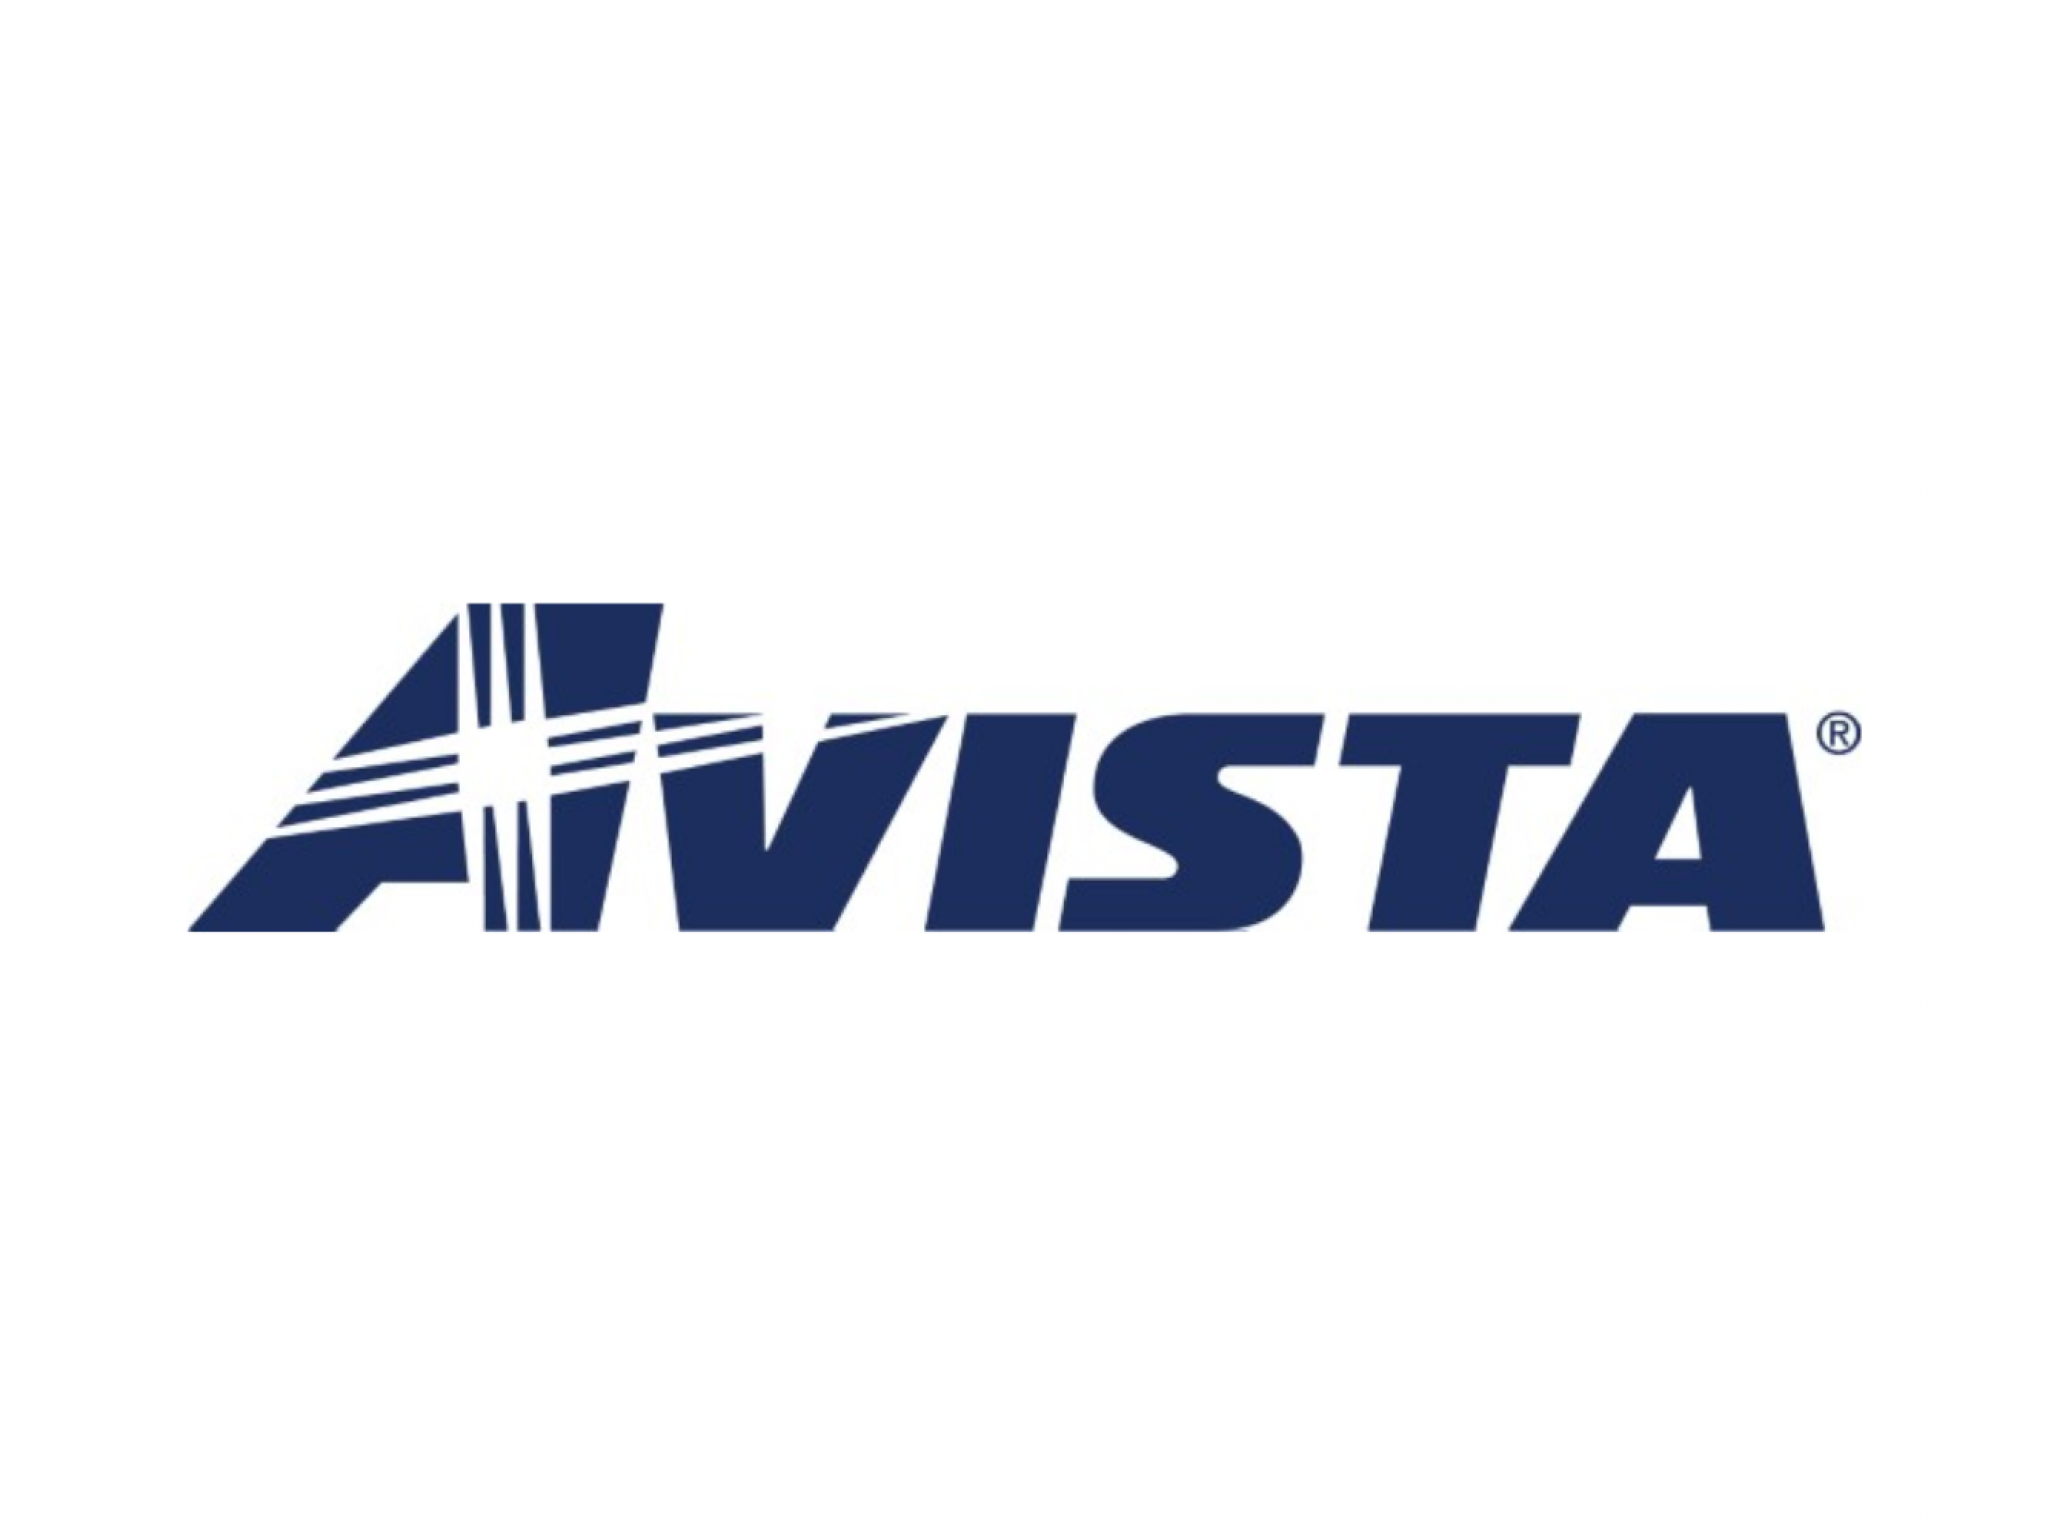  keybanc-upgrades-avista-to-sector-weight-how-wildfire-resiliency-plans-mitigate-risks 